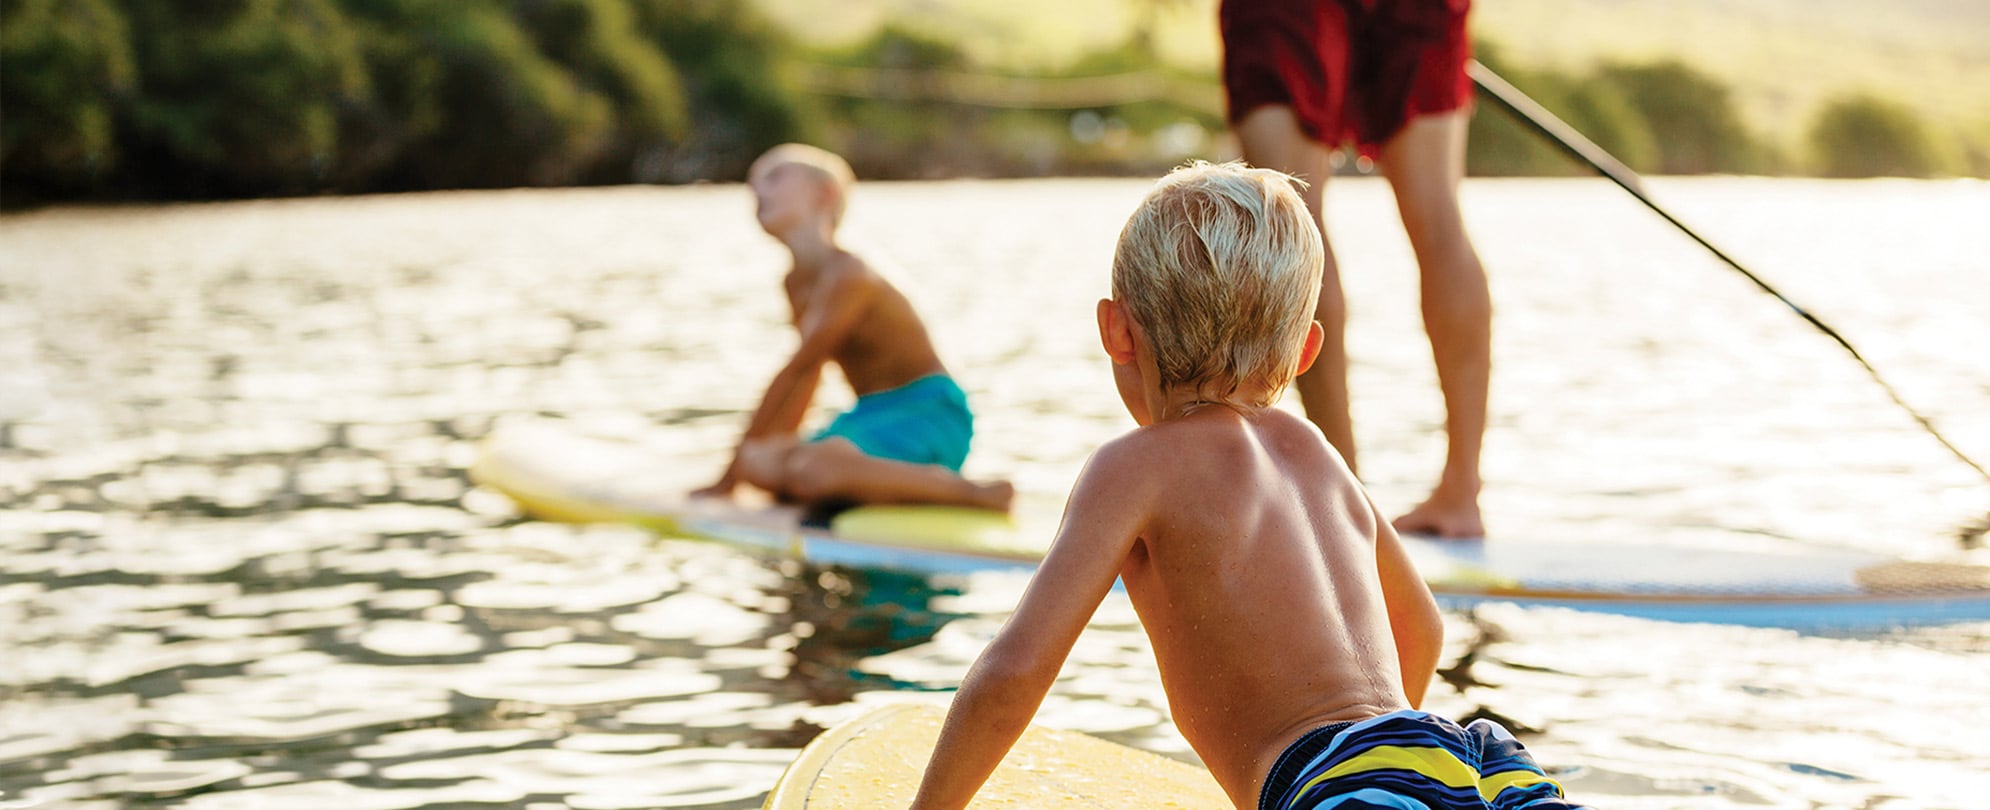 A man and two small boys paddle boarding in the middle of a lake.